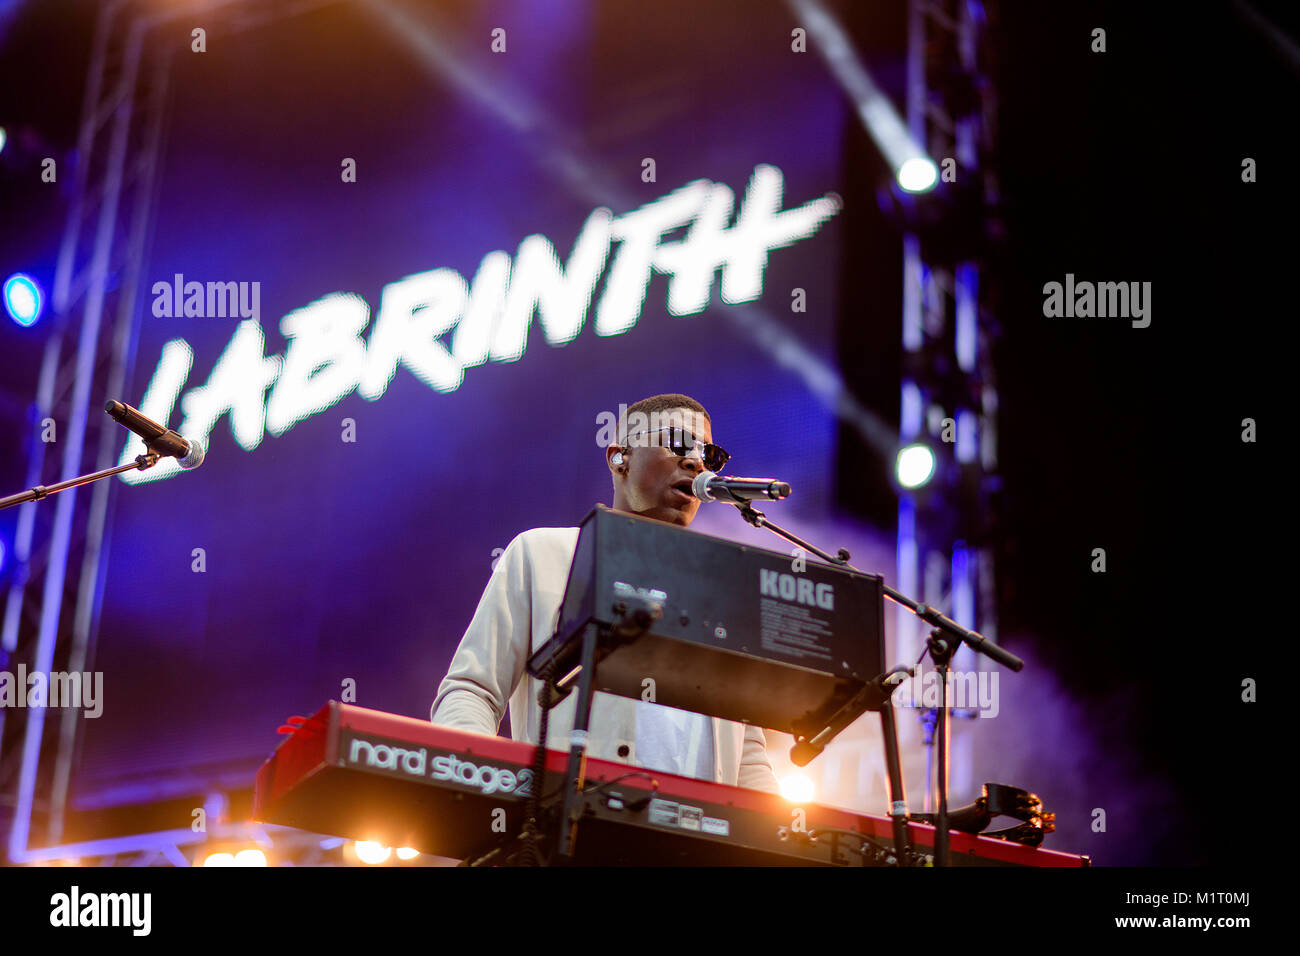 The English singer, musician and songwriter Labrinth performs a live concert at the Norwegian music festival Cloud Nine Festival in Bergen. Norway, 20/08 2016. Stock Photo